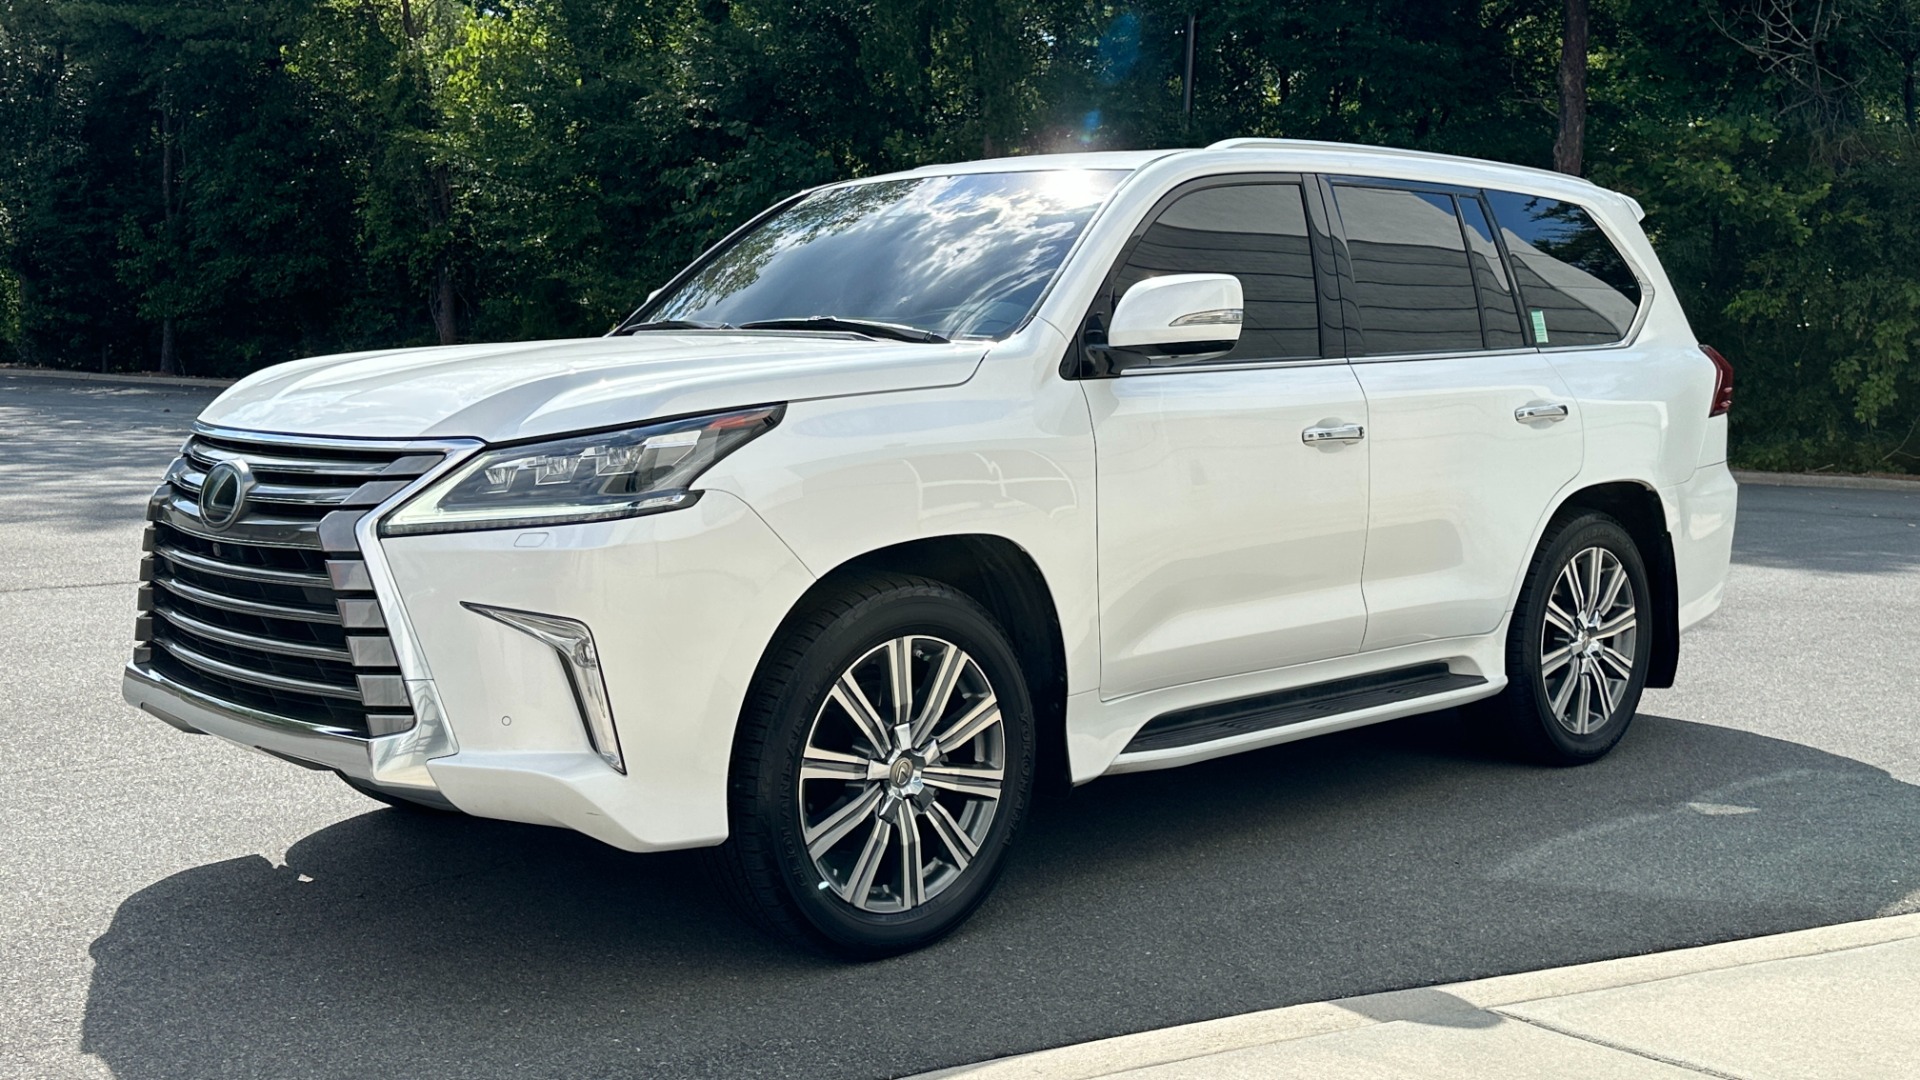 Used 2017 Lexus LX LX 570 LUXURY / MARK LEVINSON / REAR DVD SCREENS / 3 ROW / 4WD for sale $46,995 at Formula Imports in Charlotte NC 28227 5